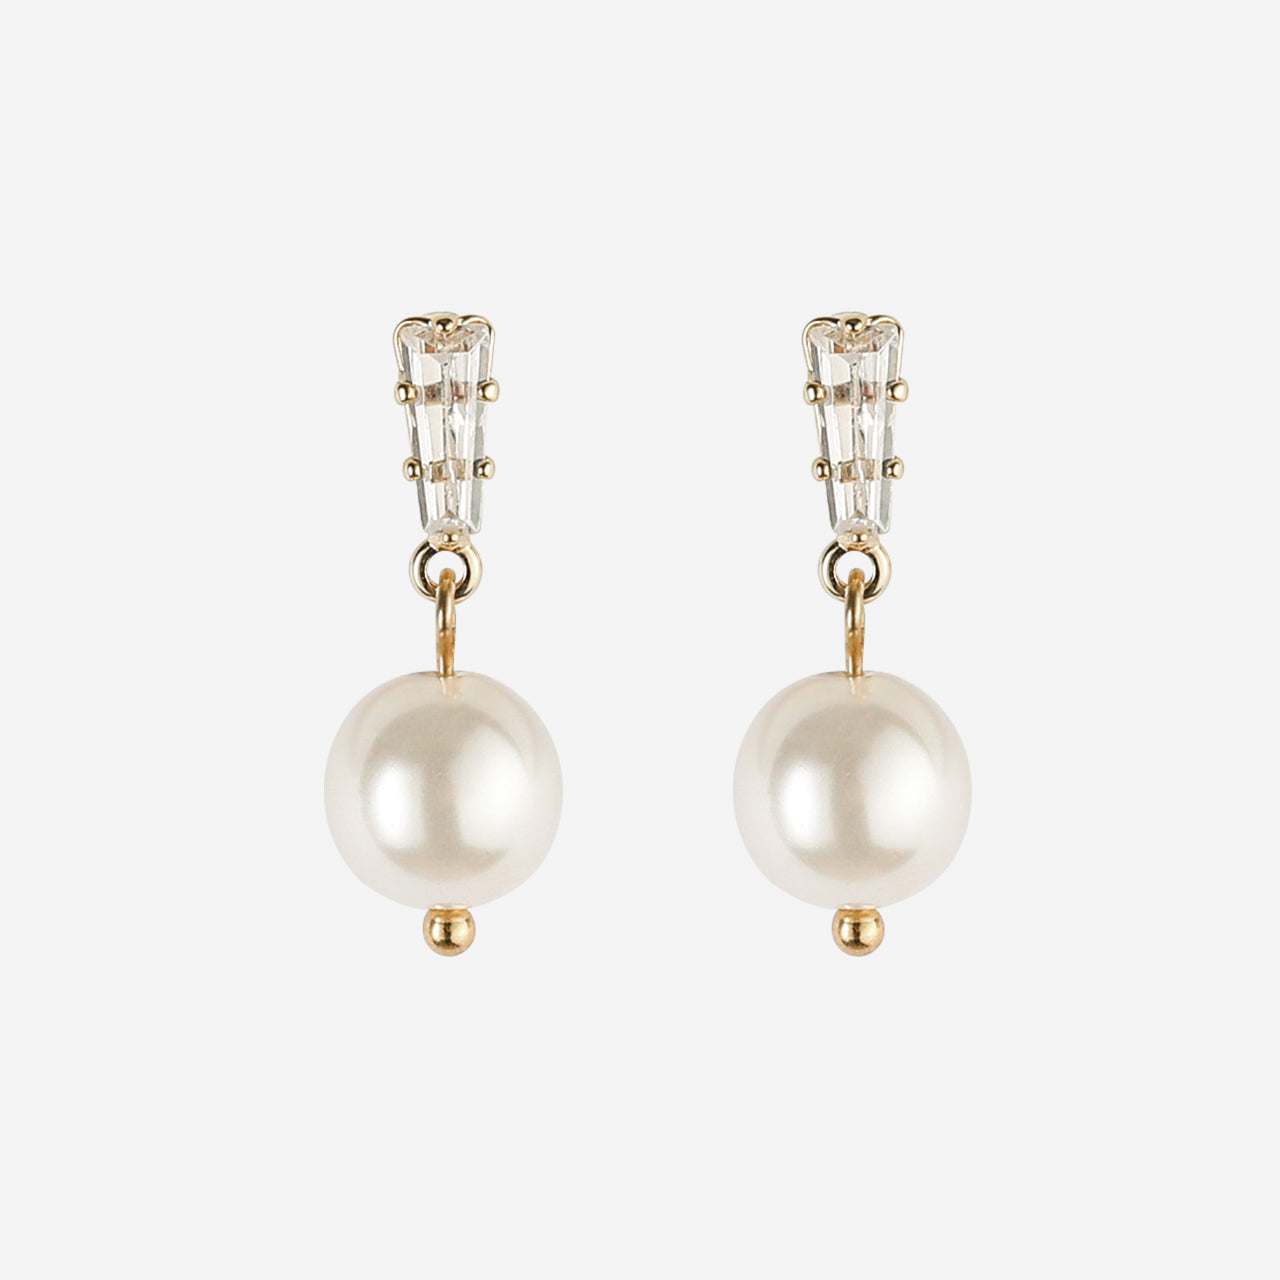 Crystal pearl Clip-On Chain Earrings - Gold